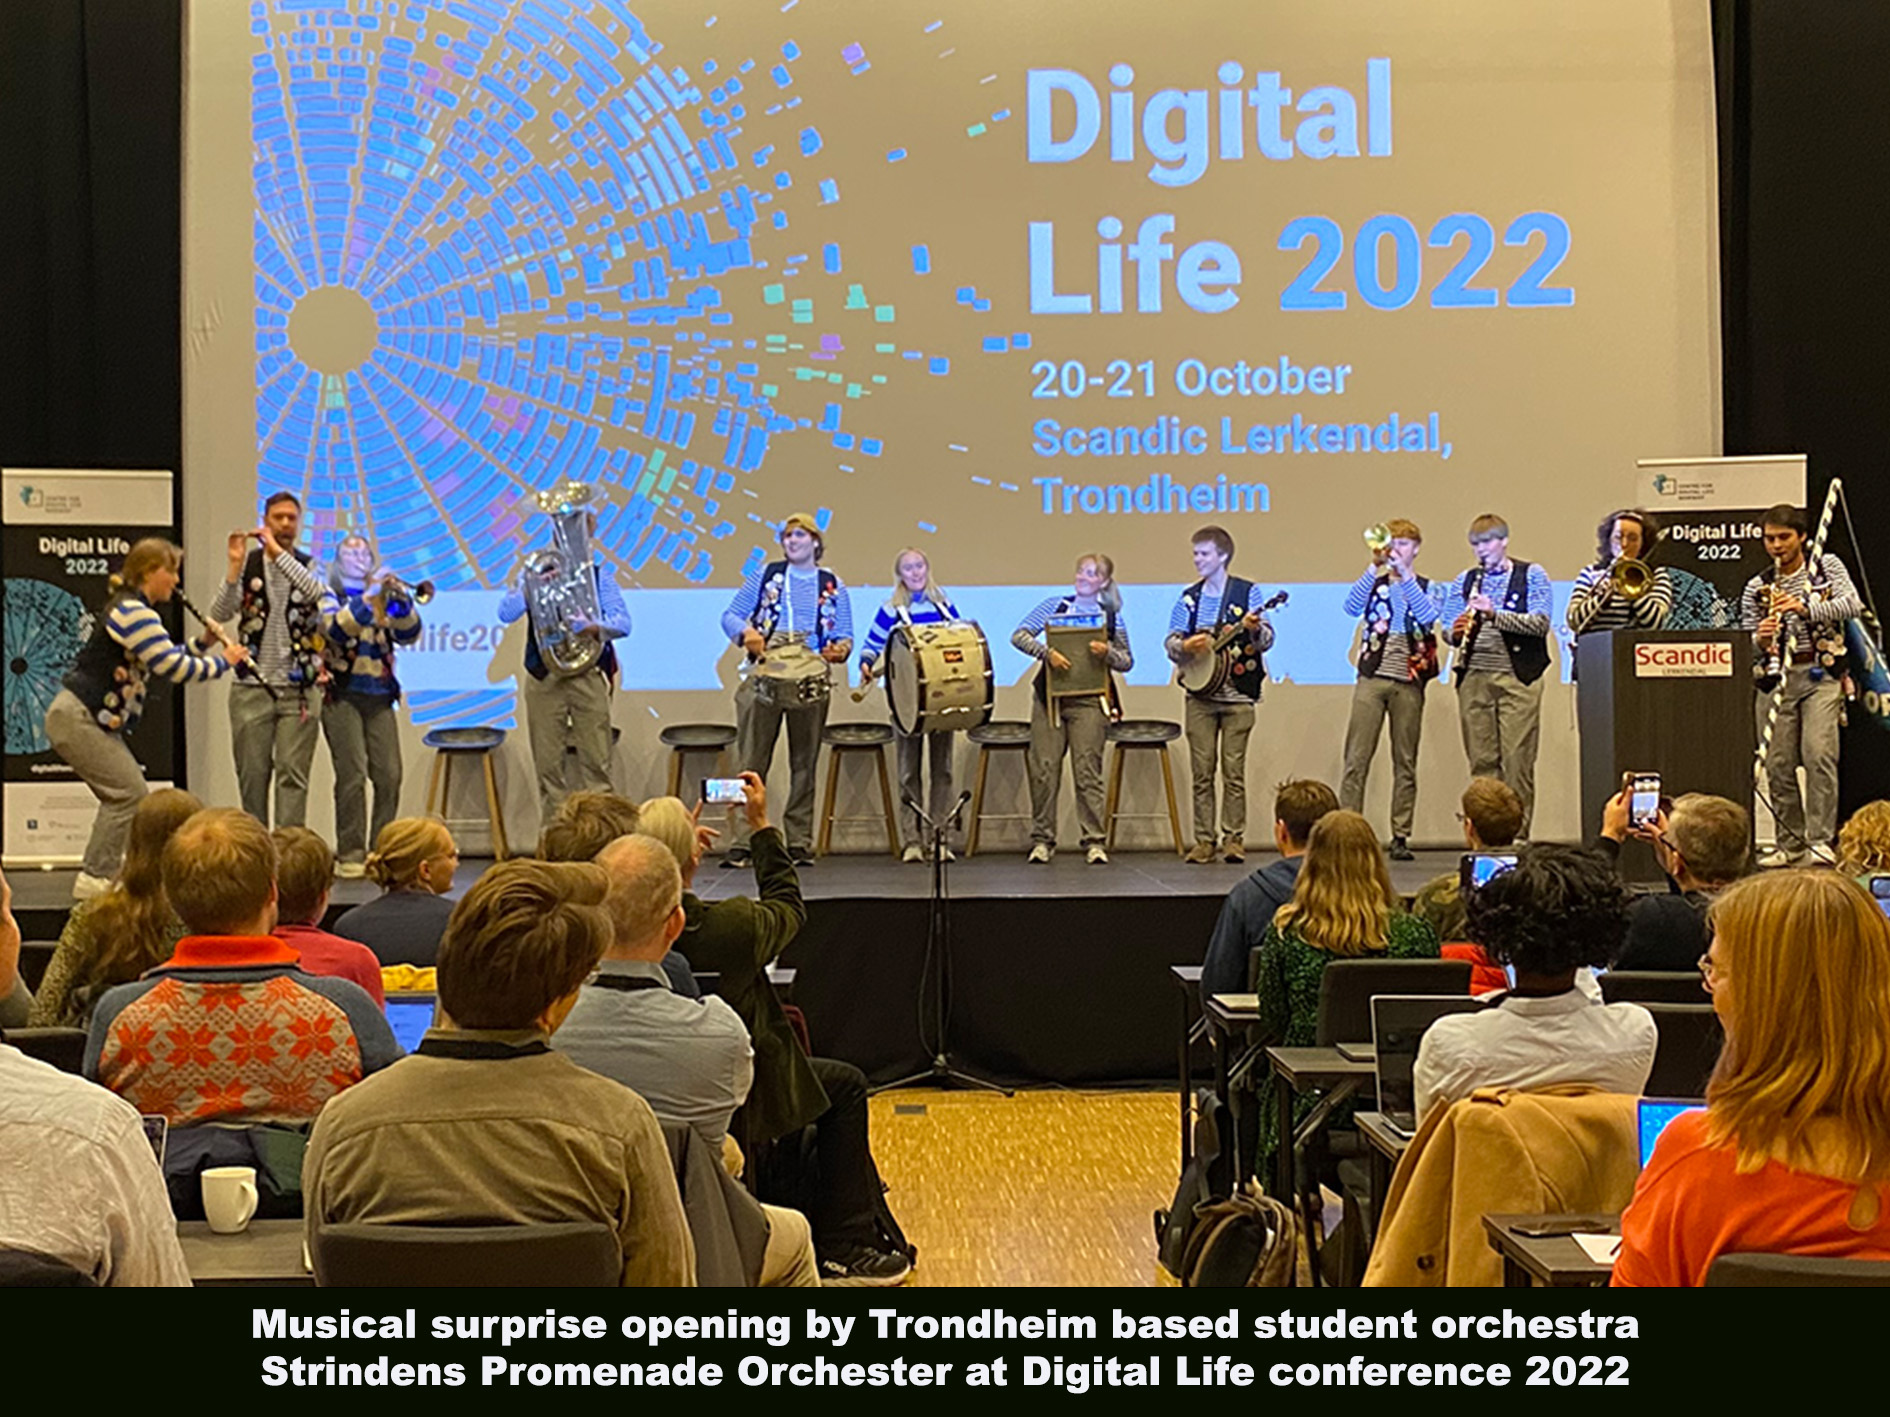 Orchestra playing in the opening of Digital Life 2022 conference